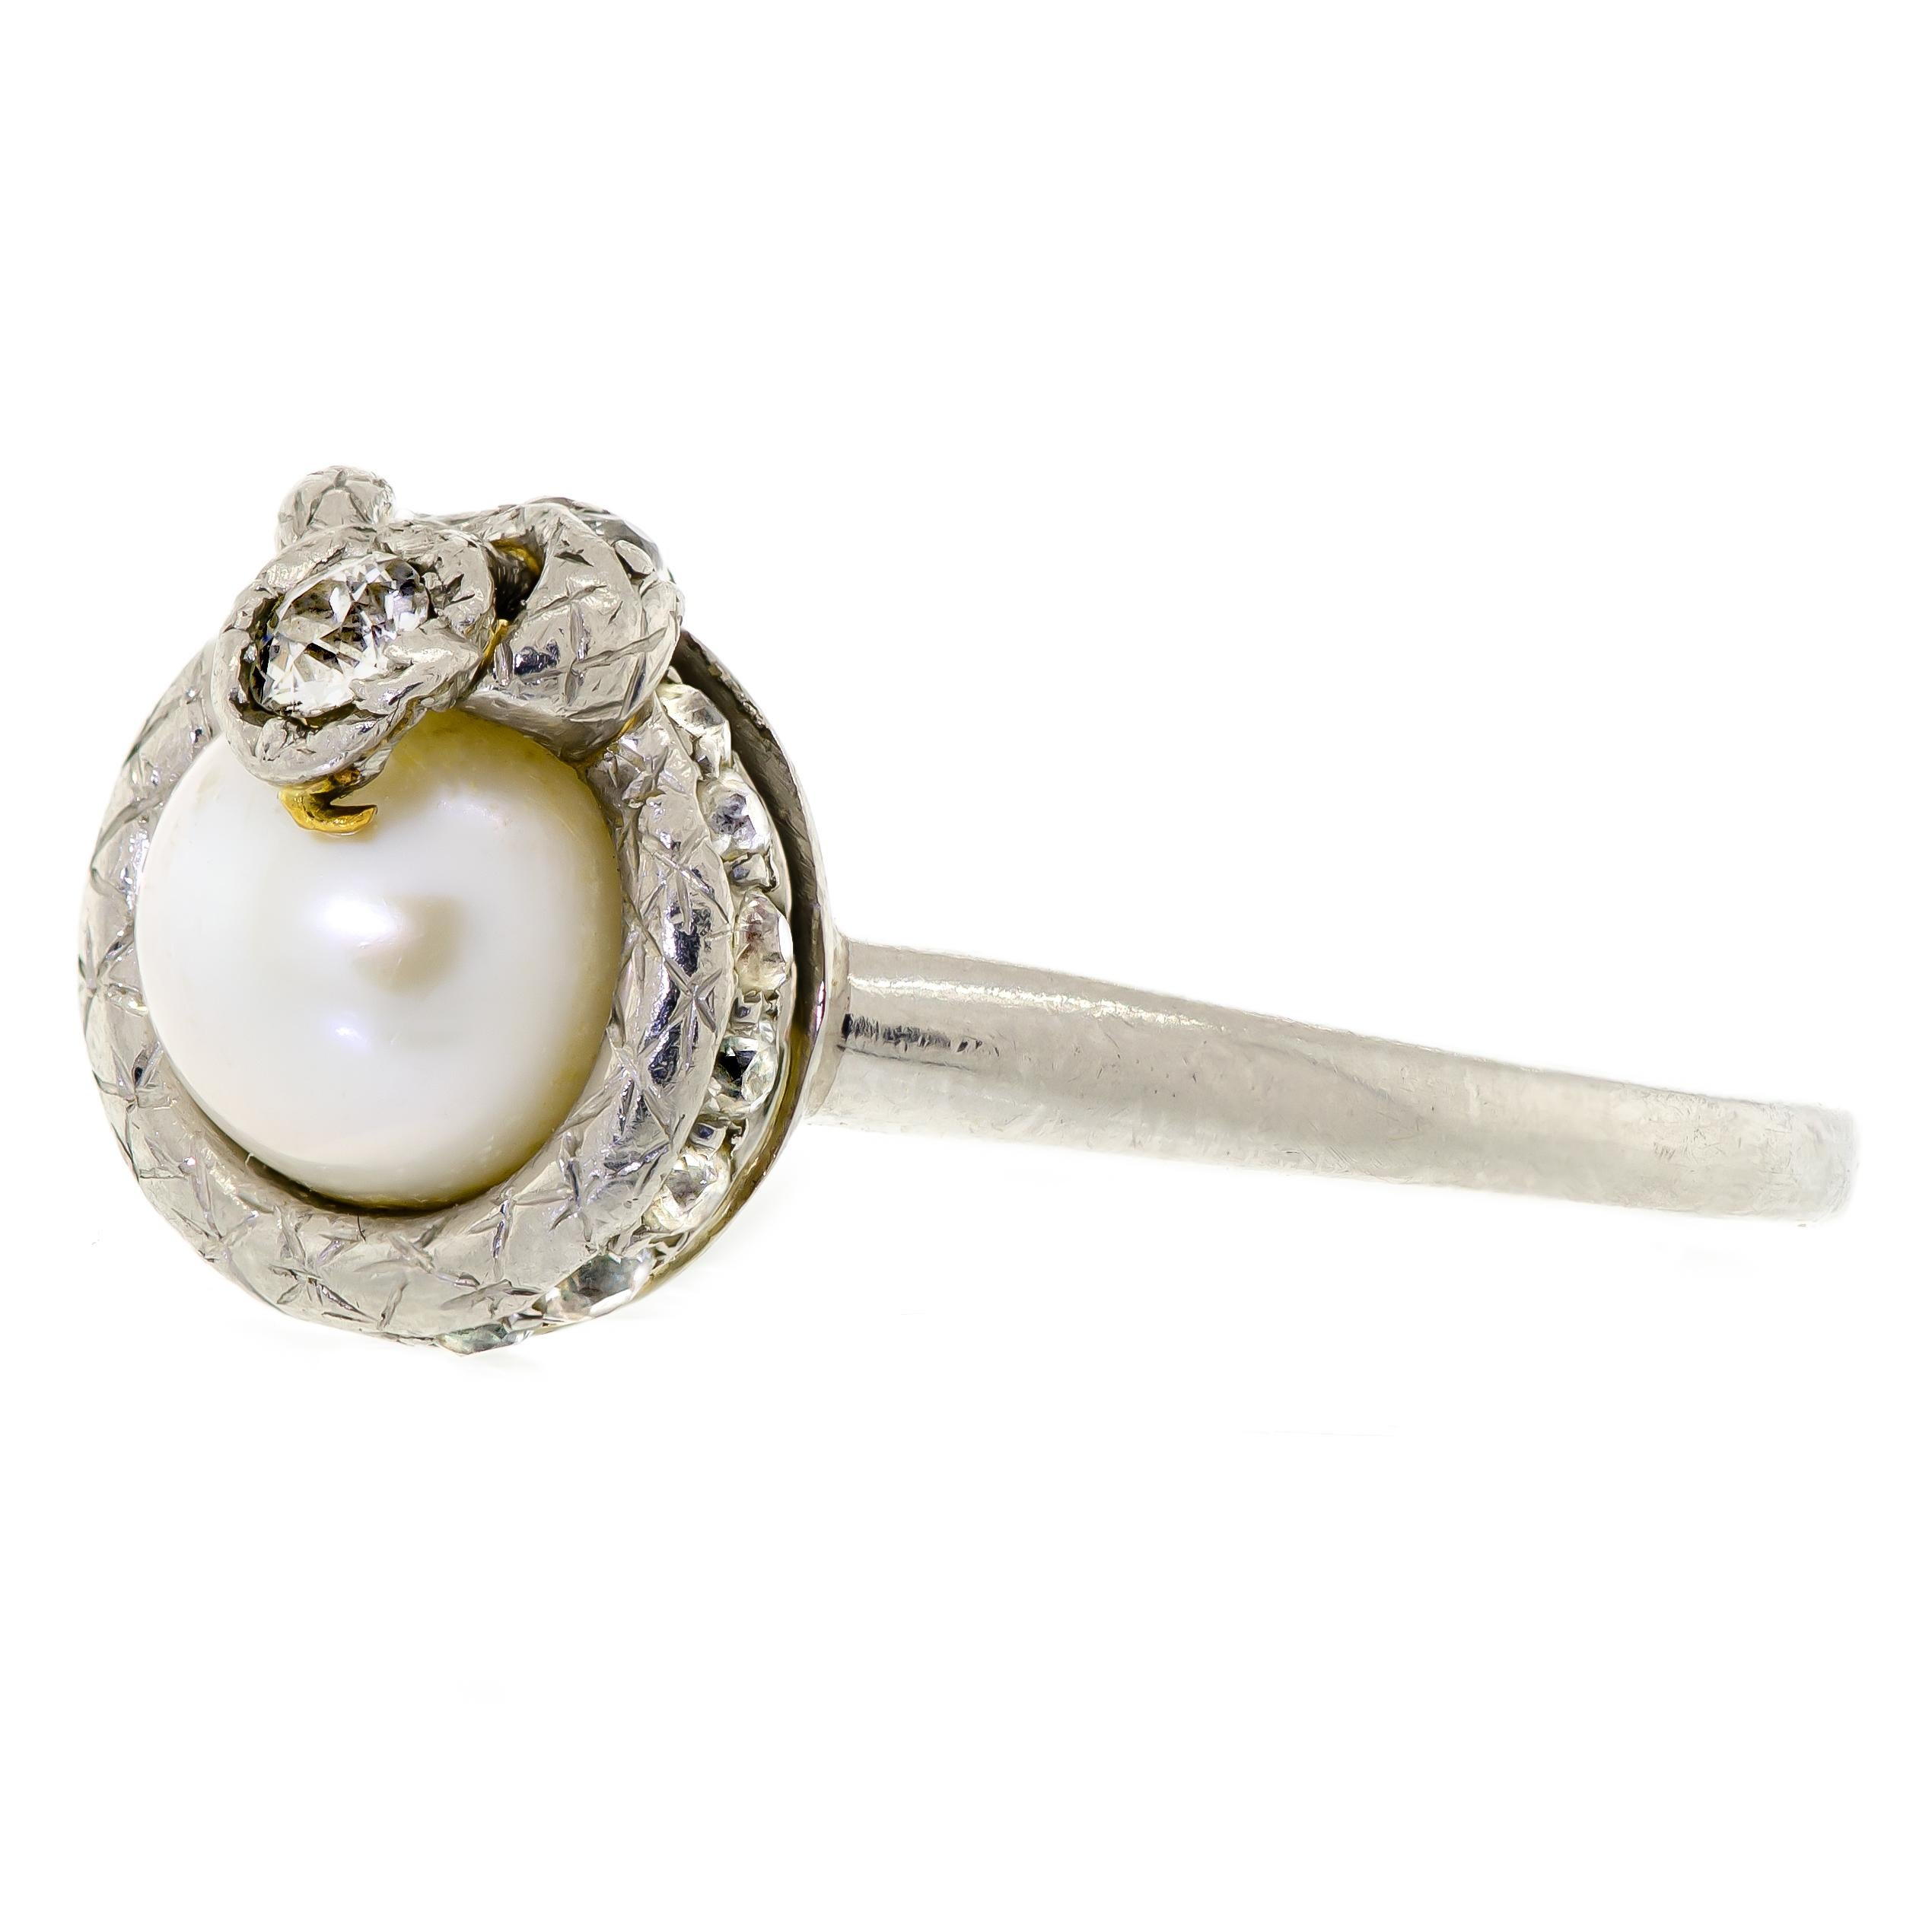 Unique and rare platinum diamond and pearl (not tested for origin) vintage snake ring circa 1925 - centrally with one pearl with diamond headed snake sitting ontop whose body is coiled around and holding the pearl - diamond border - old full cut